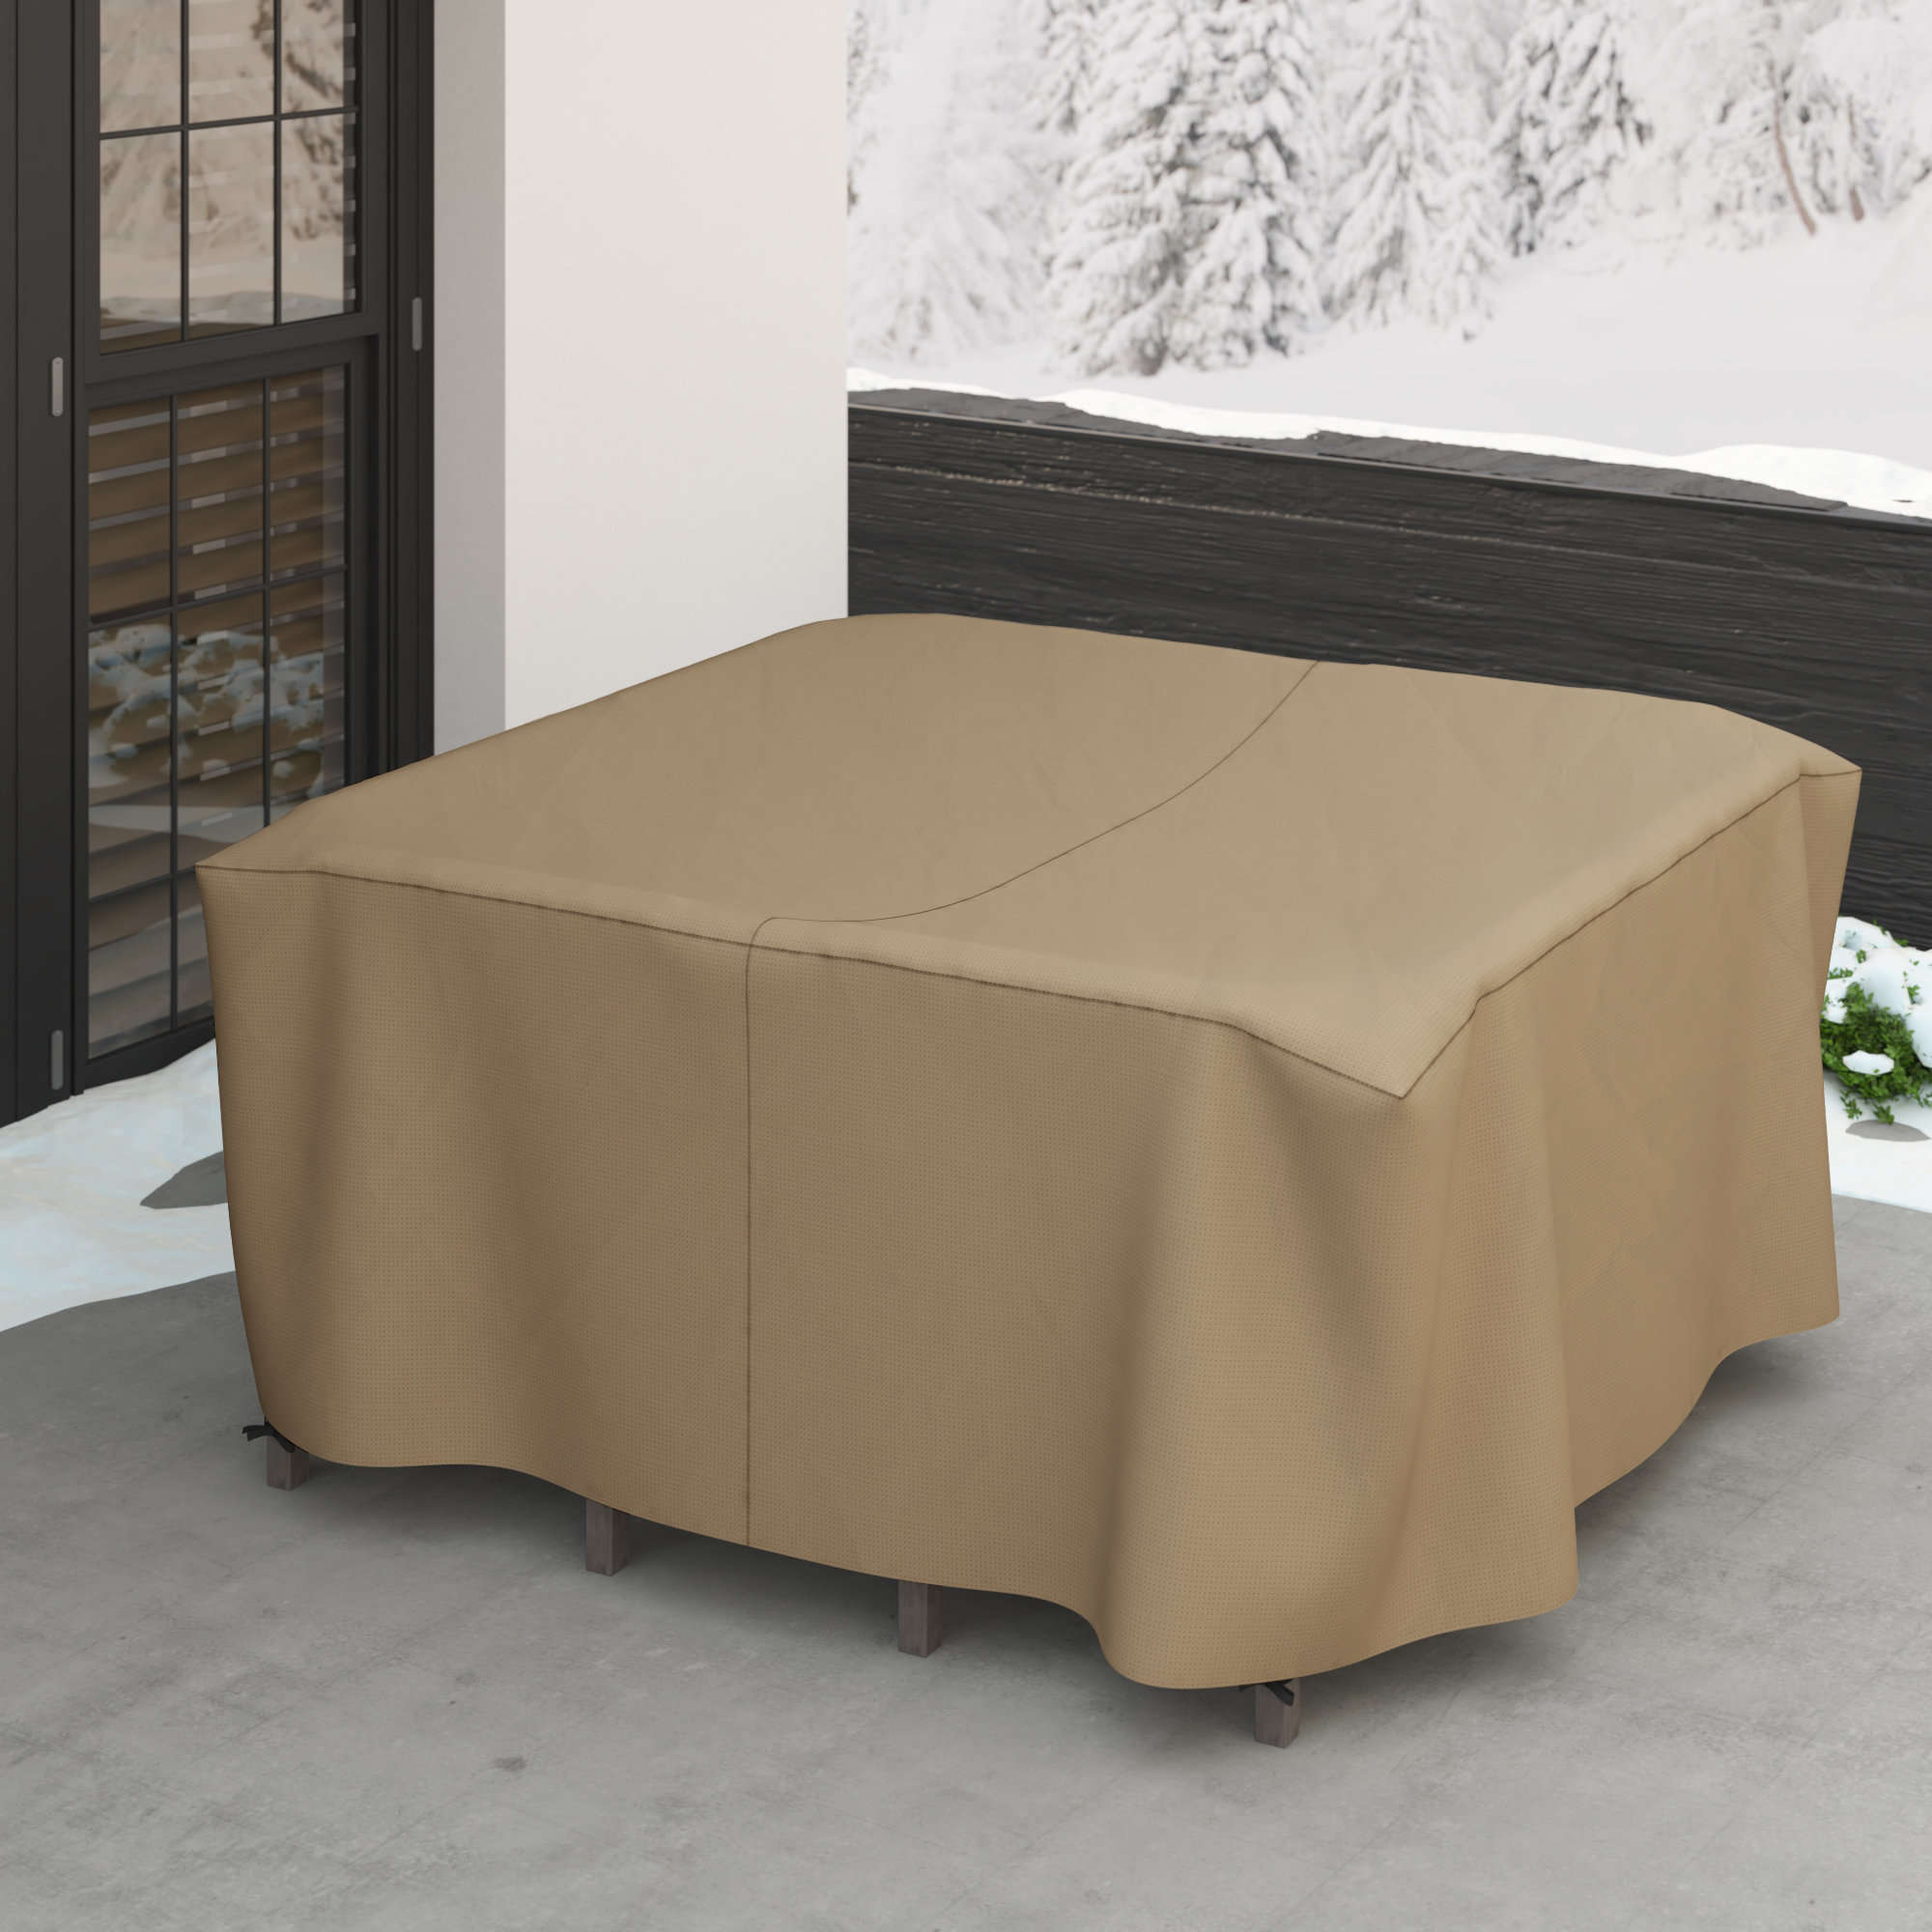 Large Tan 1116-TN Protective Covers Weatherproof Ottoman Cover 